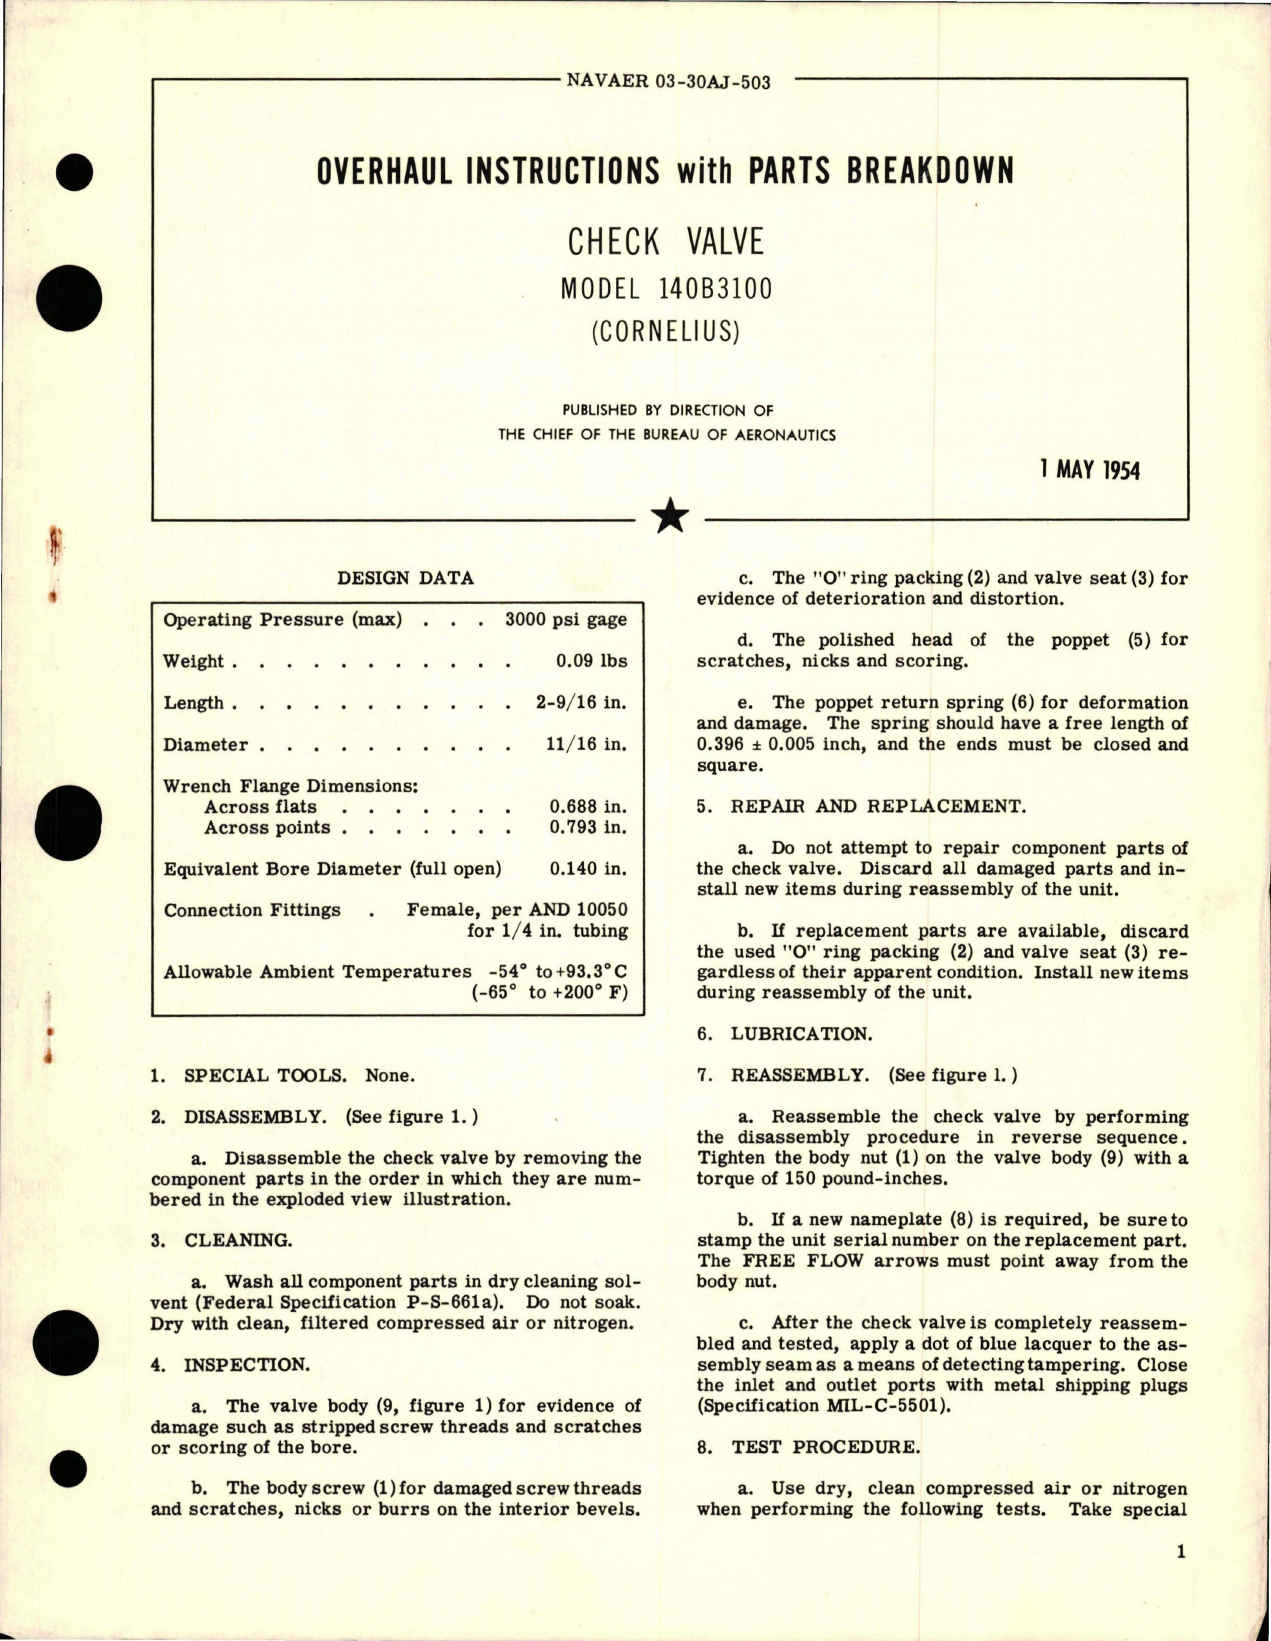 Sample page 1 from AirCorps Library document: Overhaul Instructions with Parts Breakdown for Check Valve - Model 140B3100 